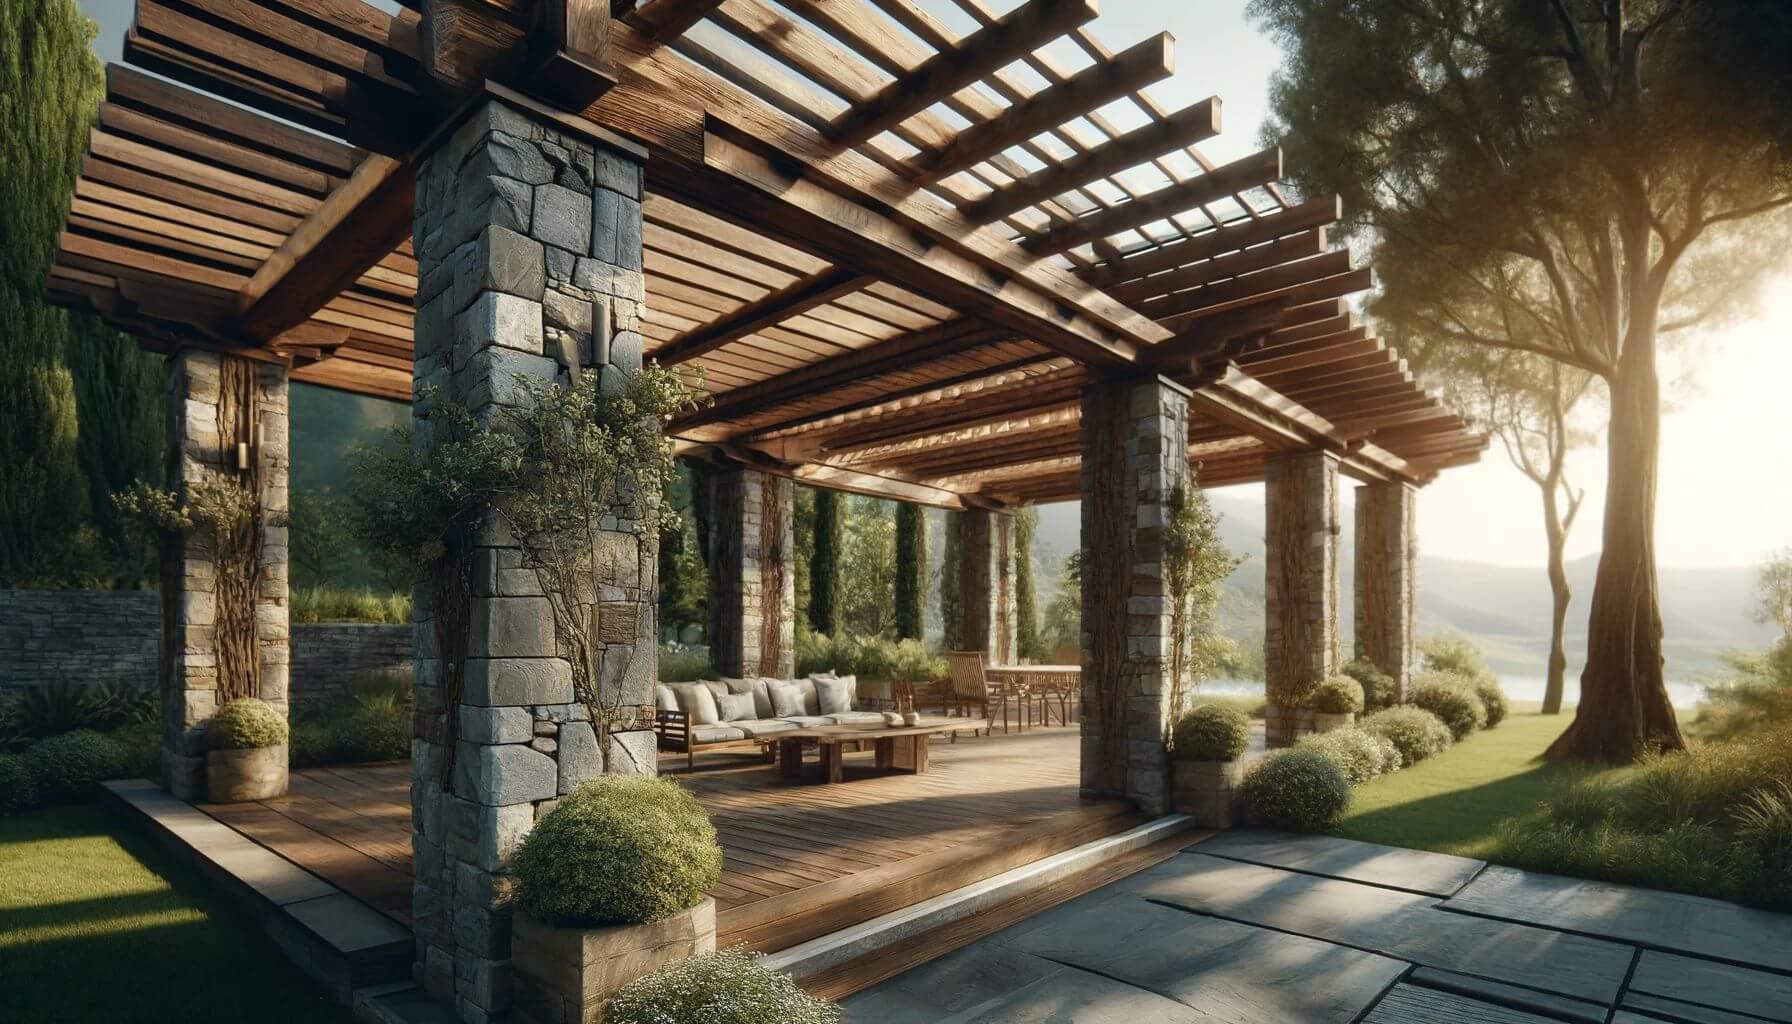 Stone and Wood Combos Pergolas that beautifully combines rustic and modern aesthetics